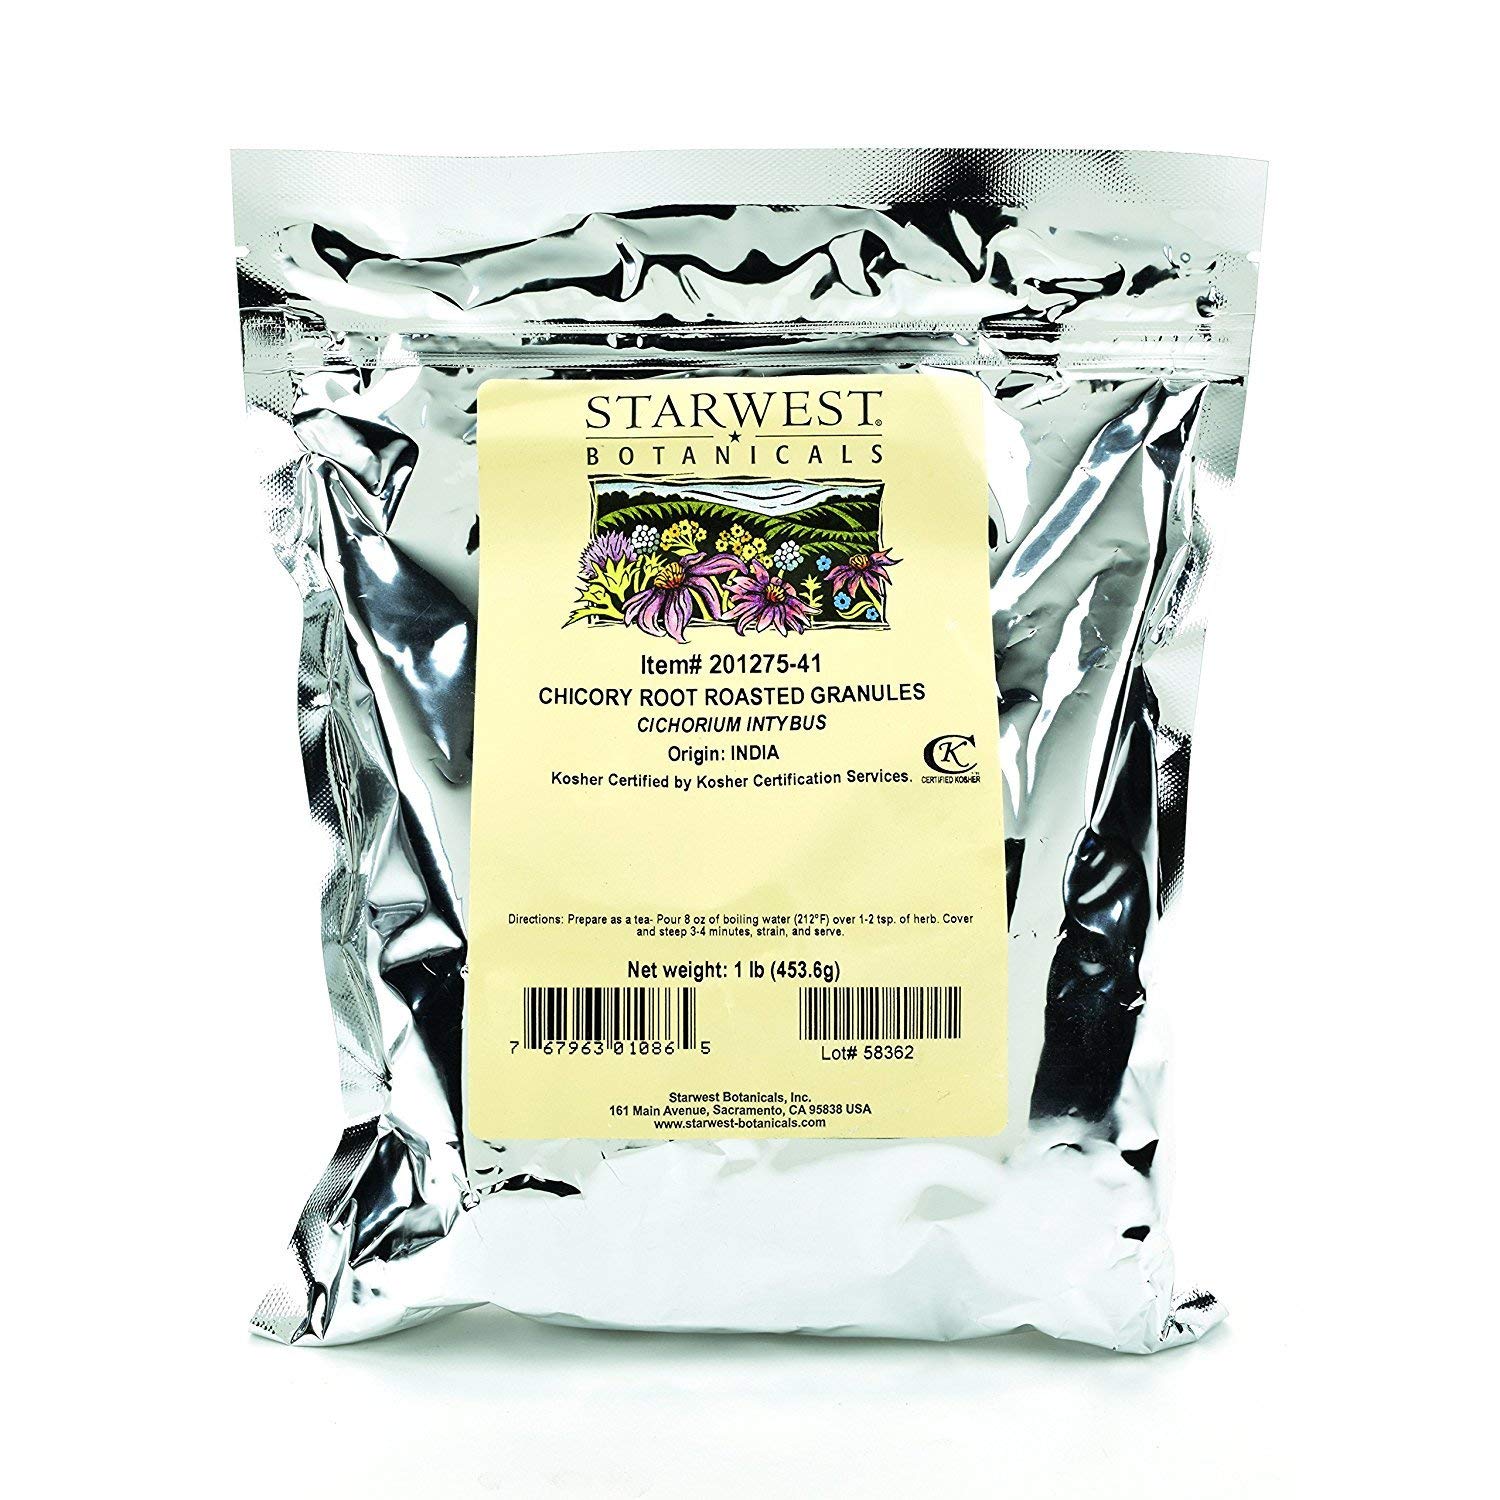 STARWEST BOTANICALS CHICORY ROOT ROASTED GRANULES